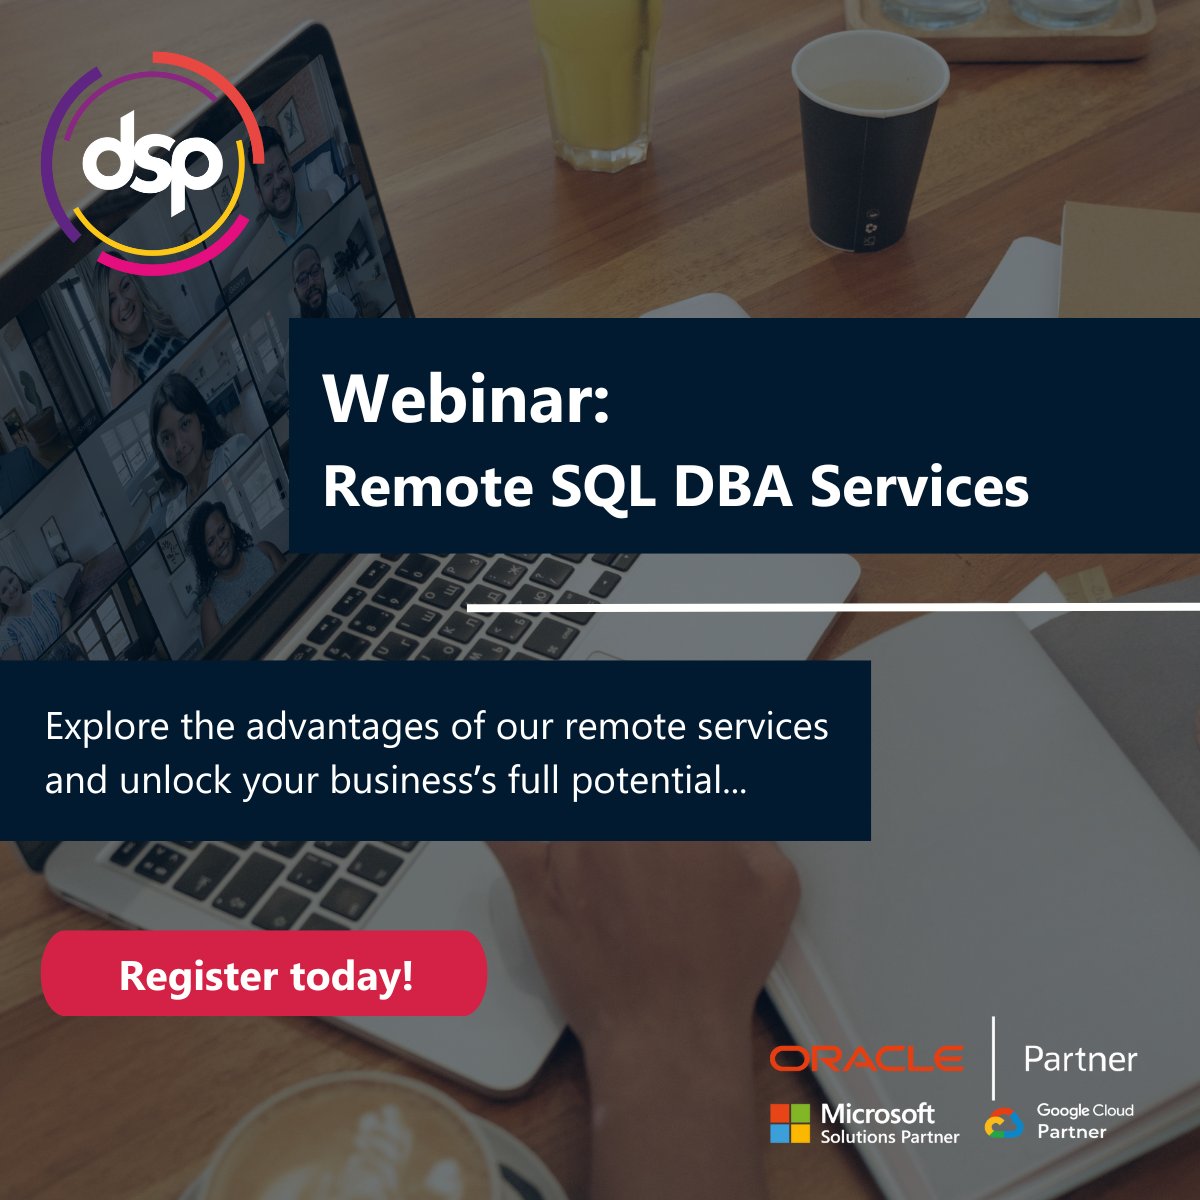 Considering outsourcing your SQL Server DBA needs for your business? Discover the benefits of our SQL Server DBA service in our webinar! Explore next-generation managed services, get insights into health checks and access expert consultancy. Register now: bit.ly/3IYLZia